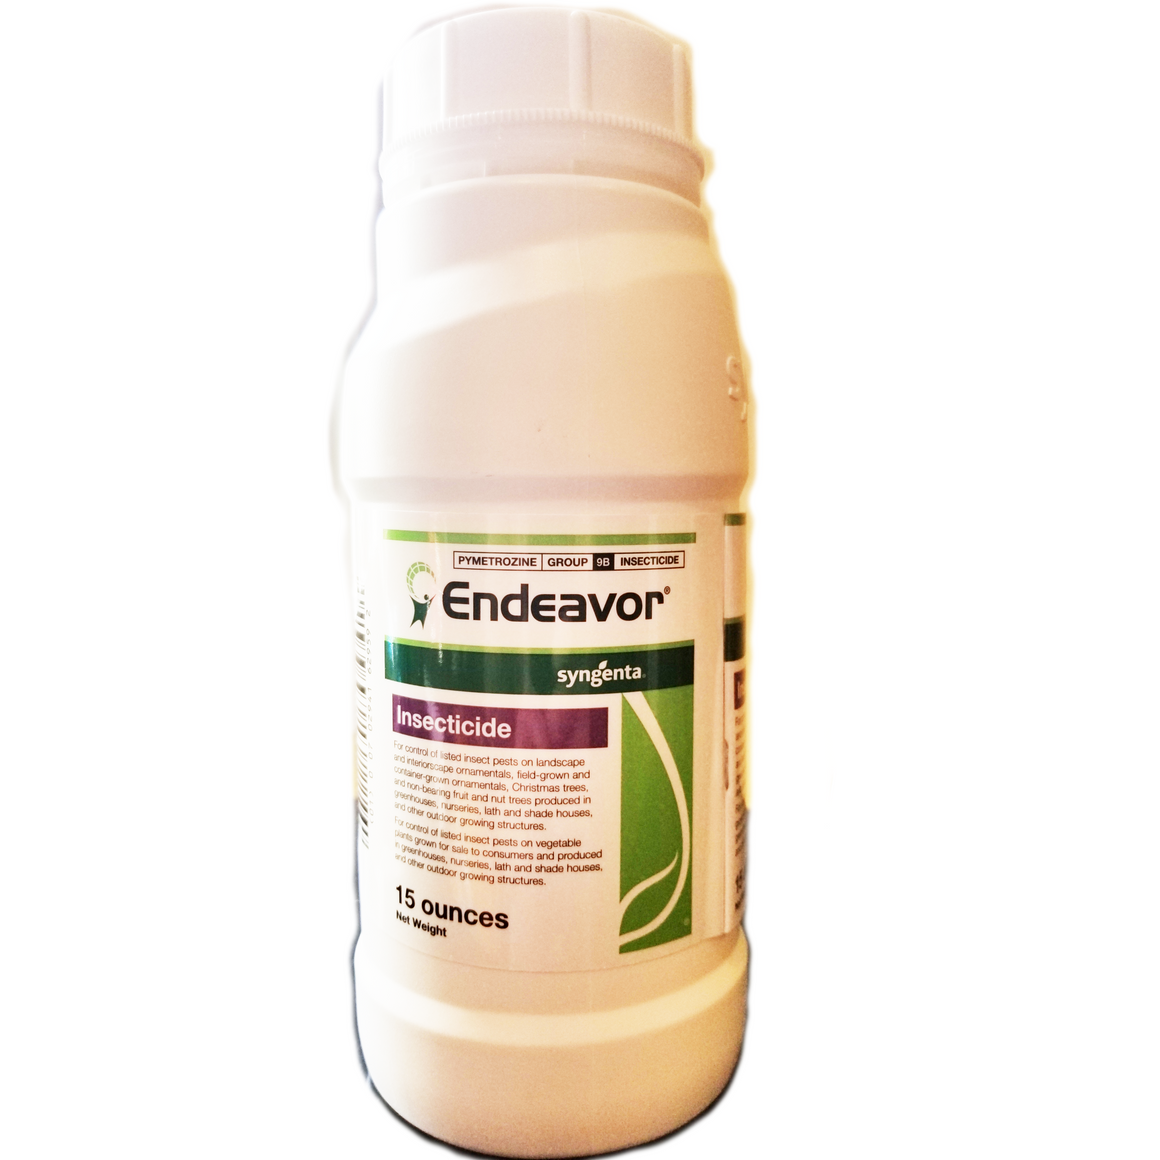 Endeavor Insecticide - 15 oz. - Seed World